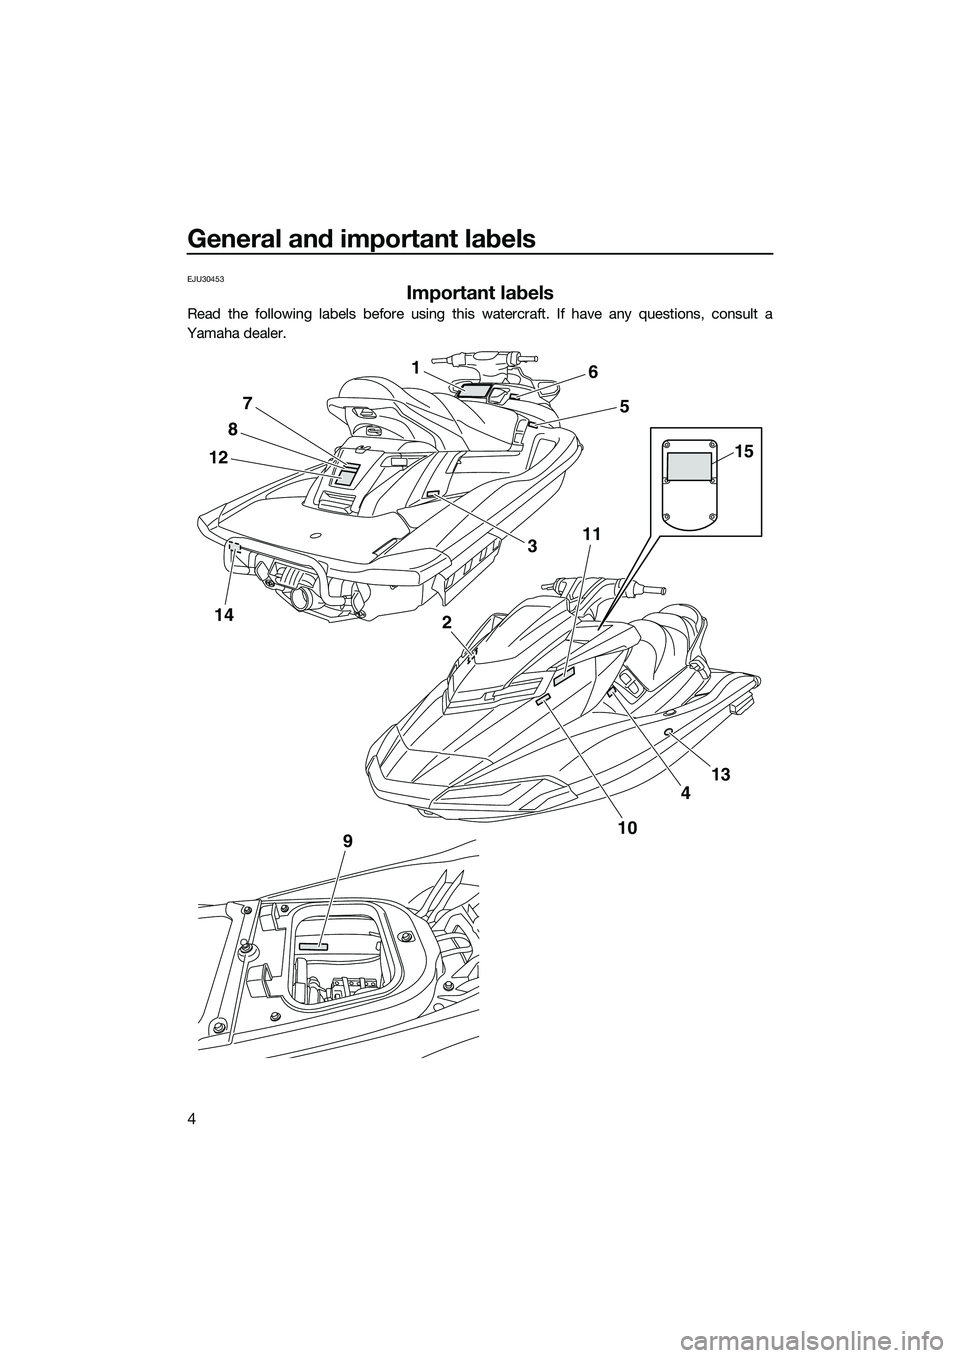 YAMAHA FX HO CRUISER 2014  Owners Manual General and important labels
4
EJU30453
Important labels
Read the following labels before using this watercraft. If have any questions, consult a
Yamaha dealer.
14
1
12
8
7
11
2
9
4
13
10
6
5
3
15
UF2